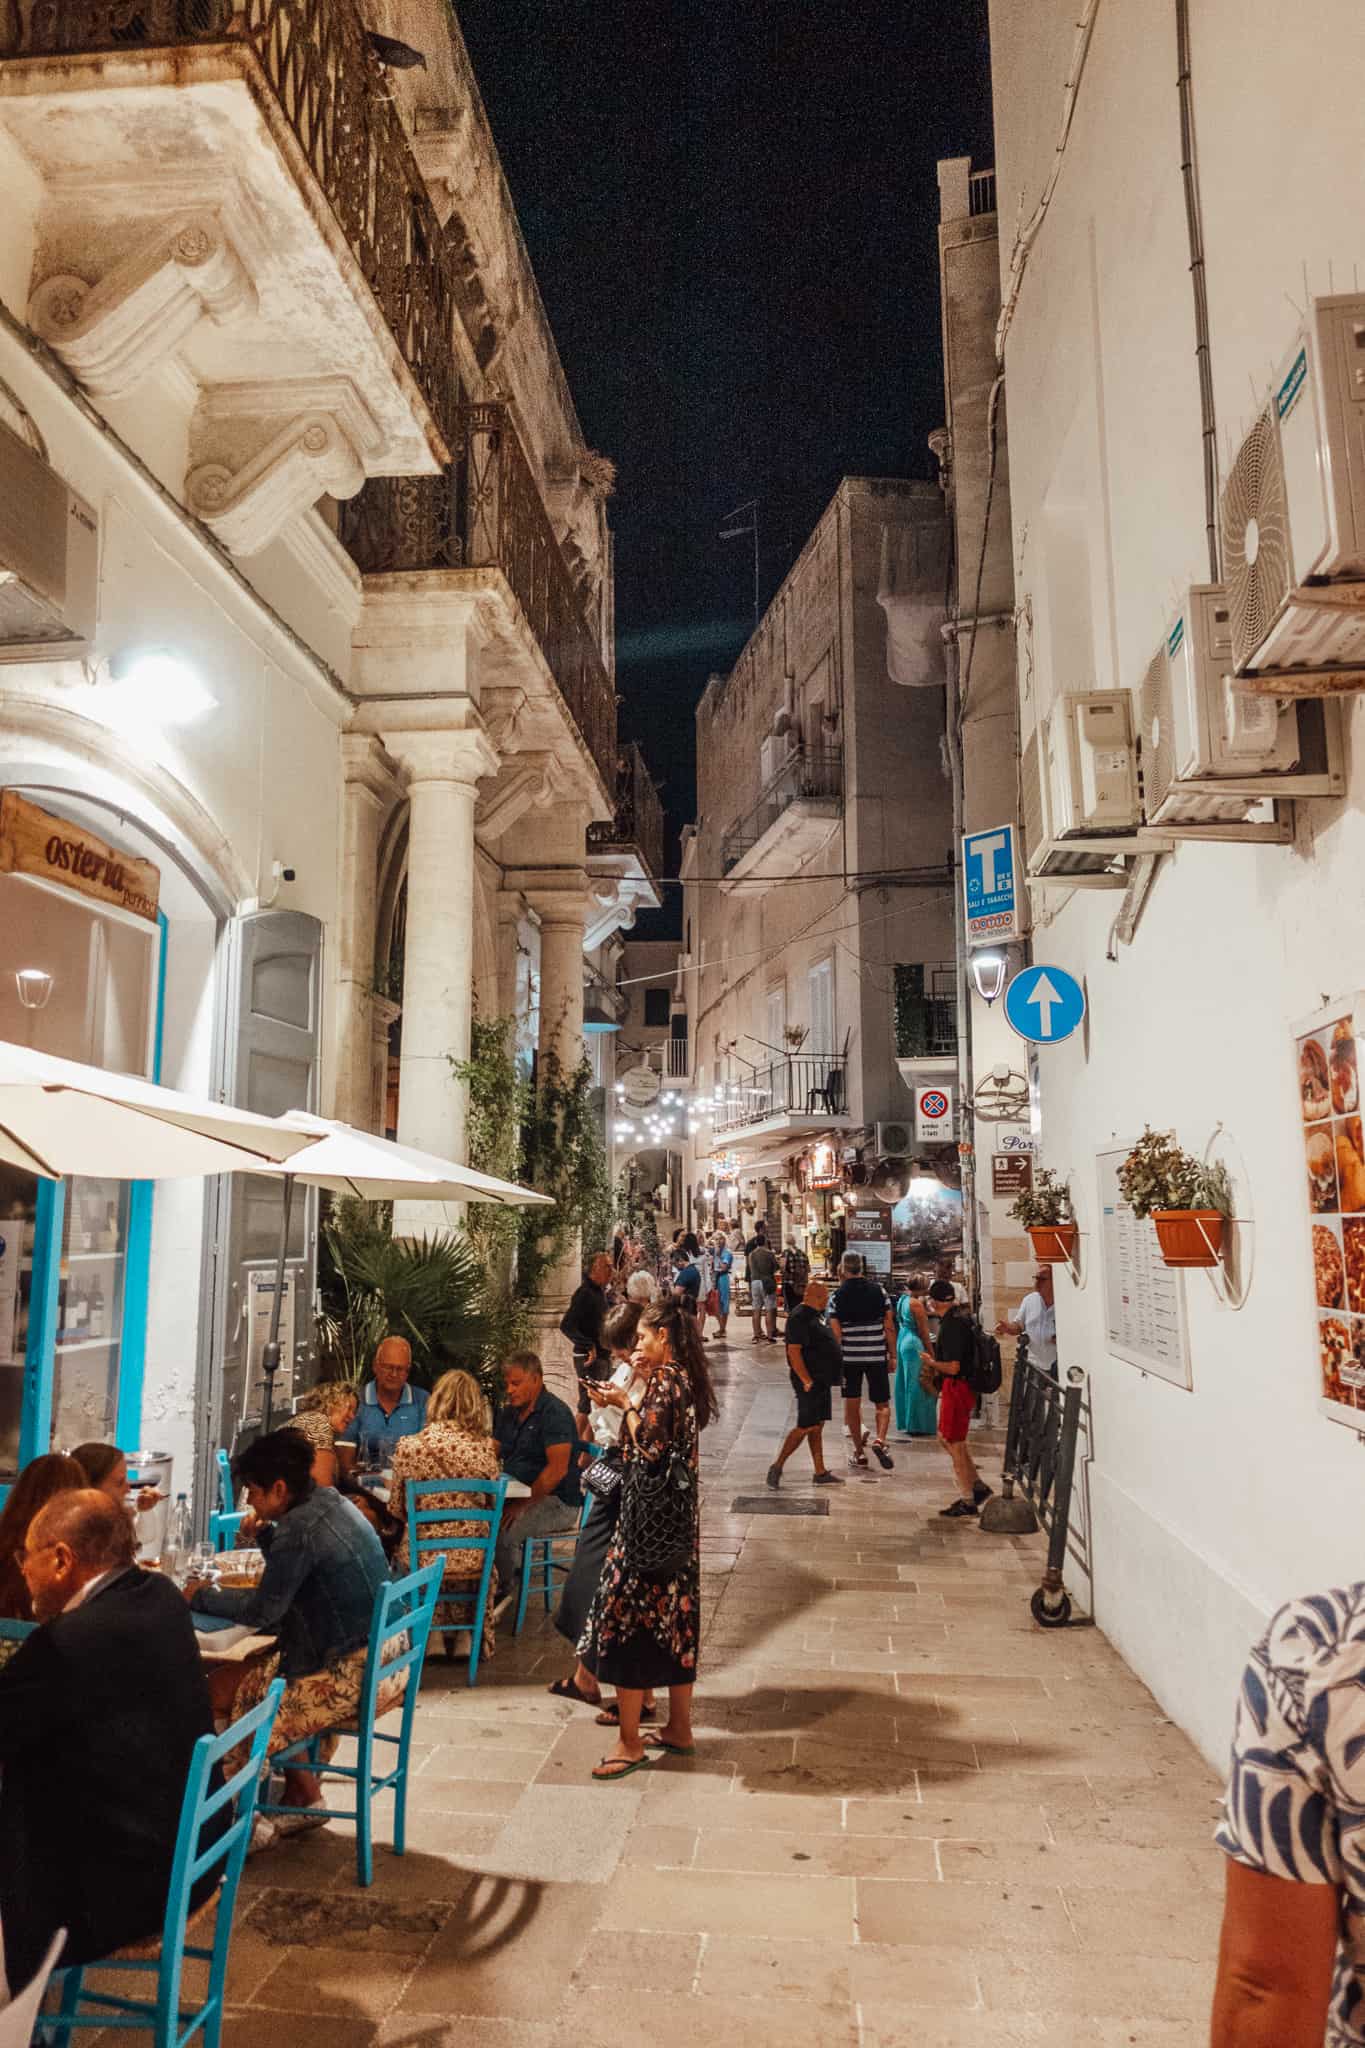 Busy street of Monopoli at night